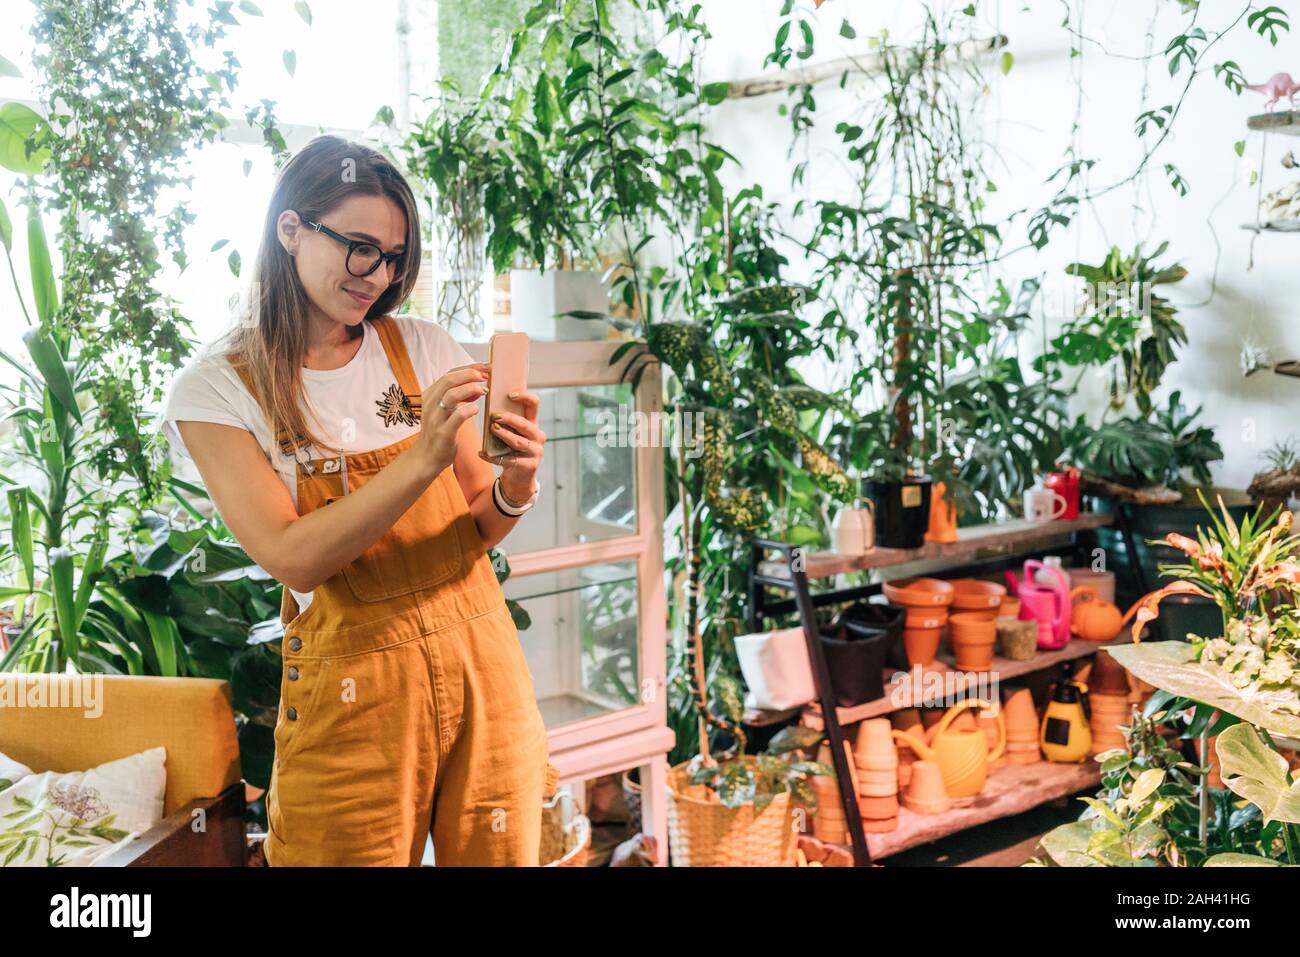 Young woman taking smartphone picture in a small gardening shop Stock Photo